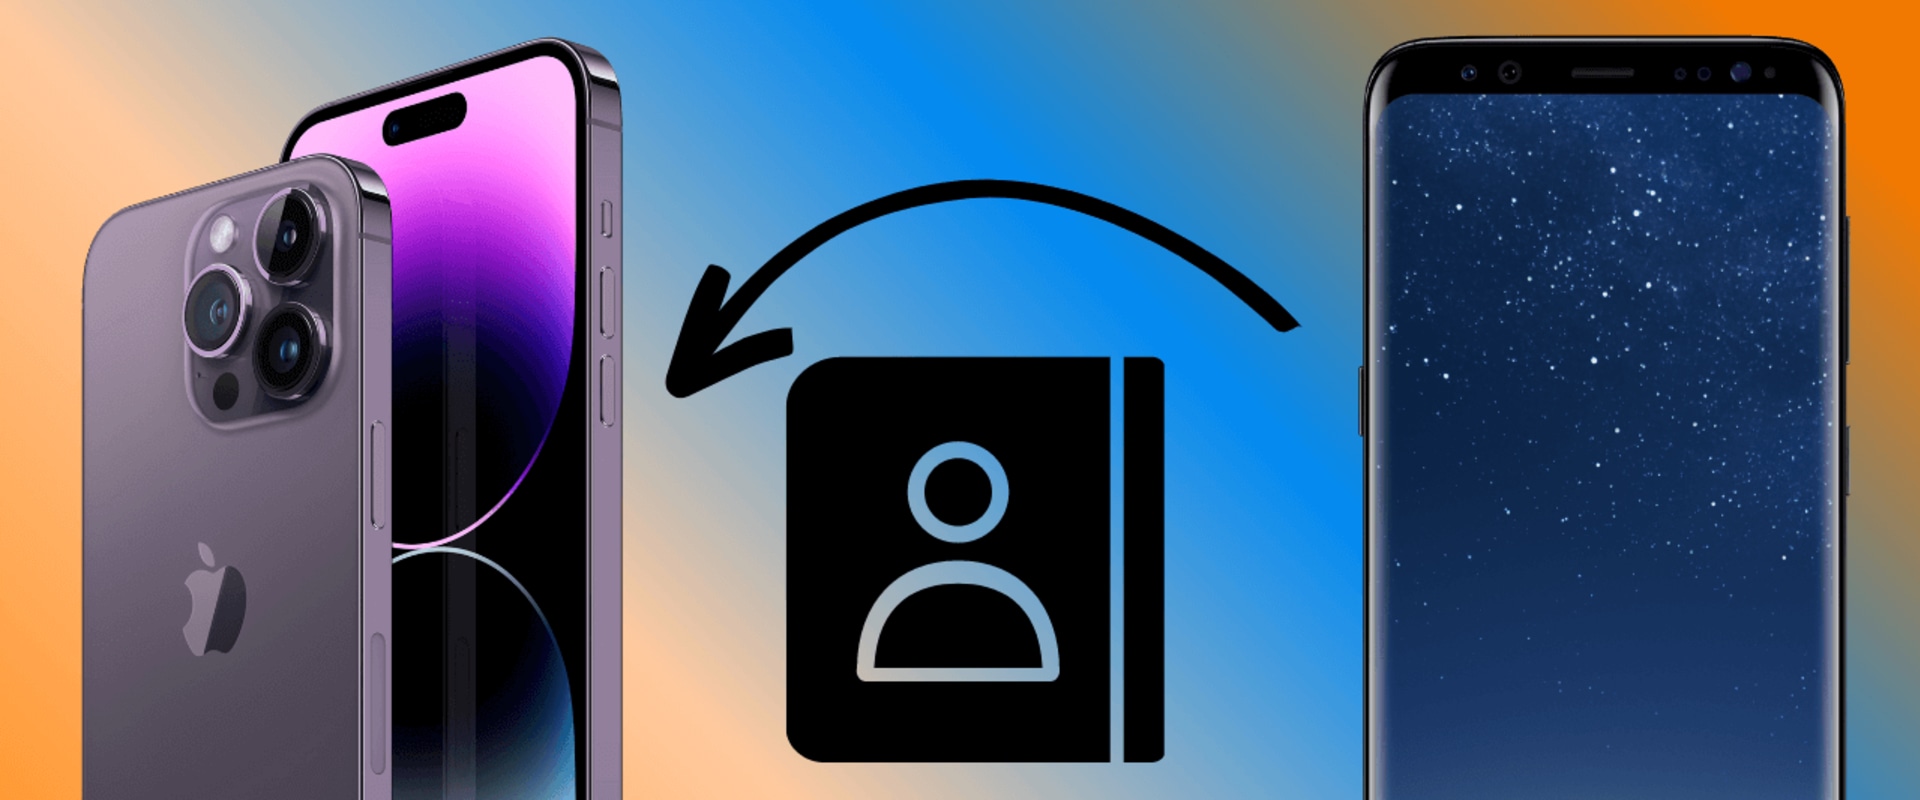 How do i transfer contacts from iphone to iphone via bluetooth?